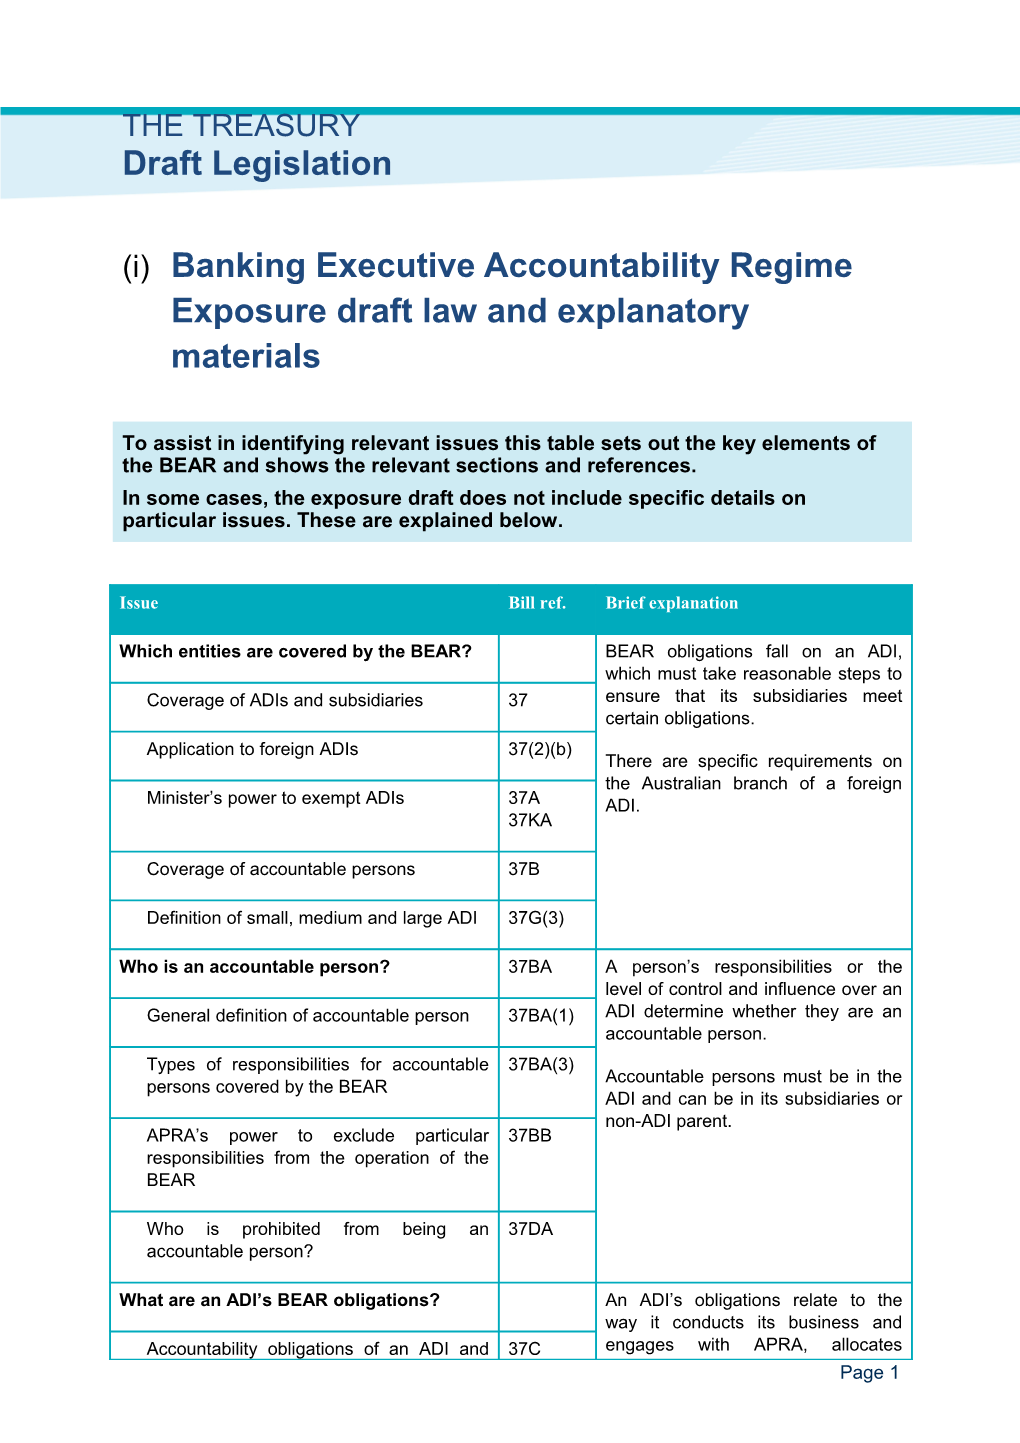 Banking Executive Accountability Regimeexposure Draft Law and Explanatory Materials